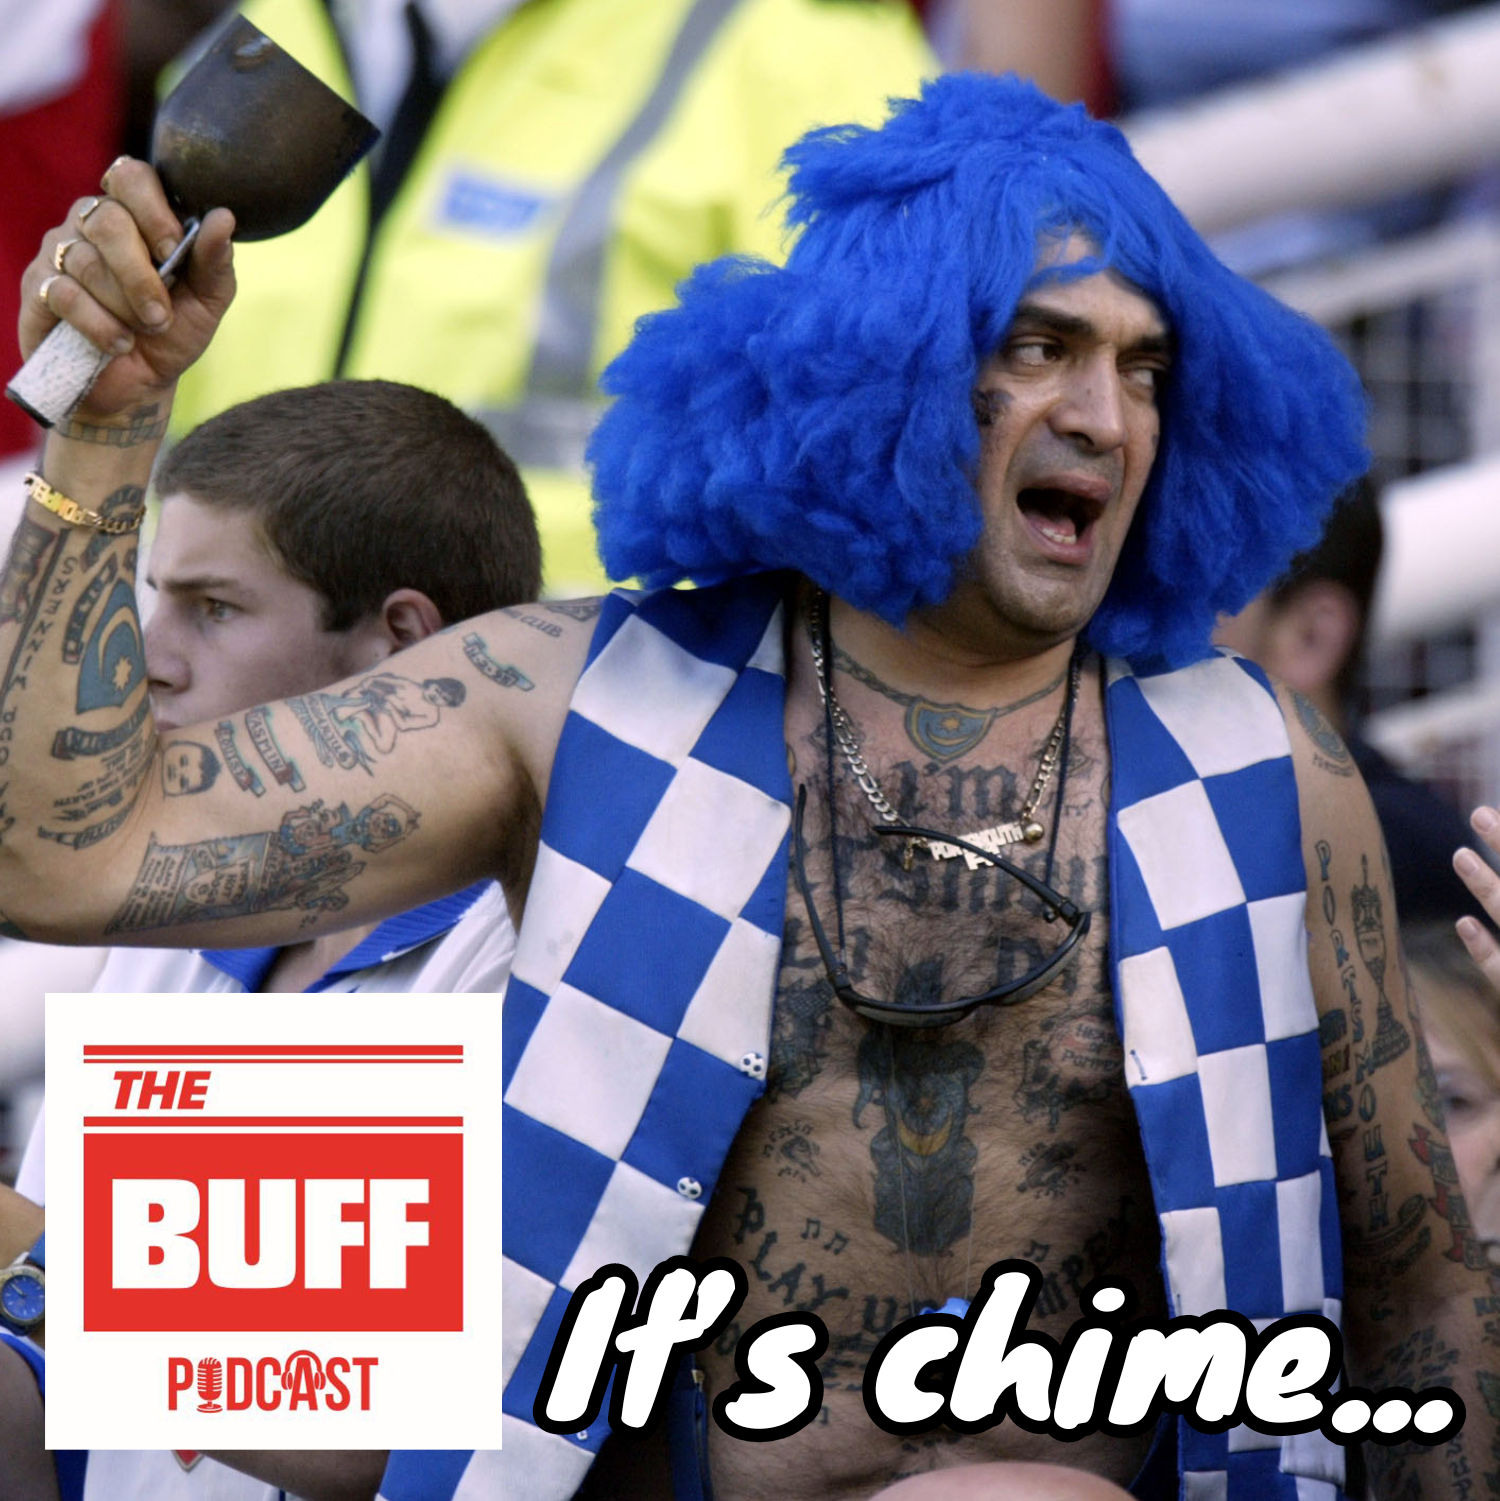 Pompey and circumstances - The Buff's big build up